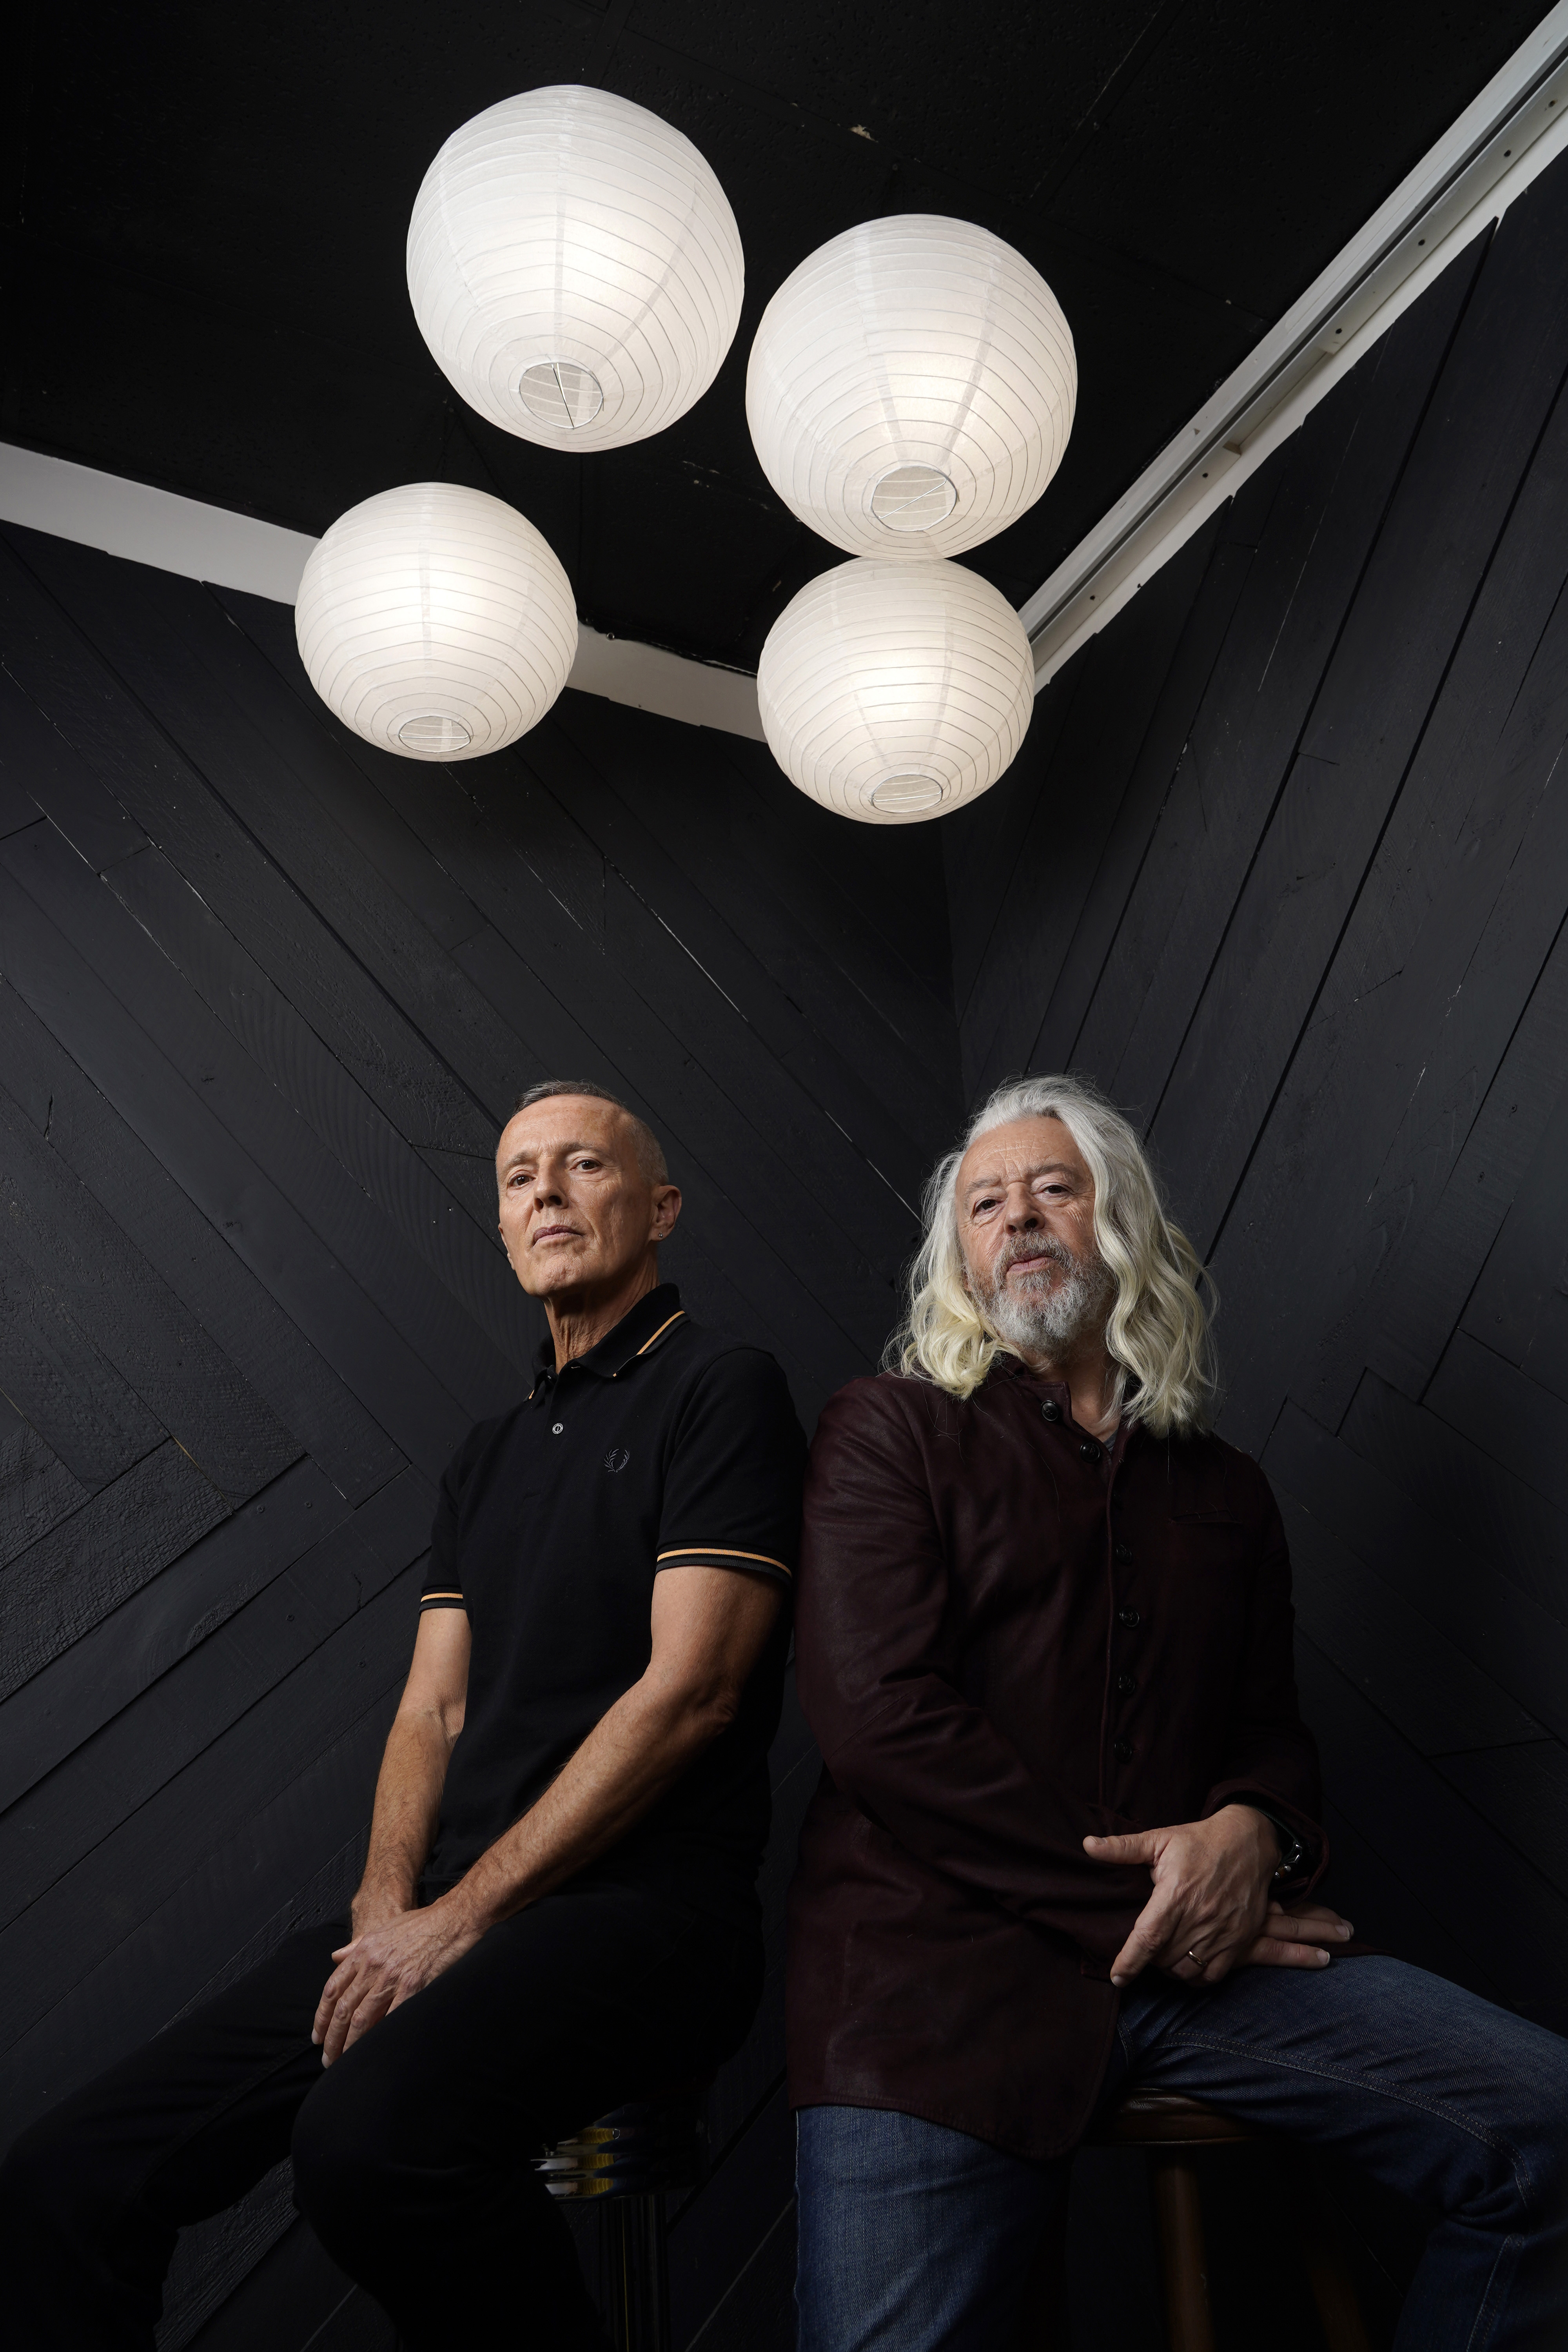 New Tears for Fears songs 'plumb the depths of our souls' - The San Diego  Union-Tribune